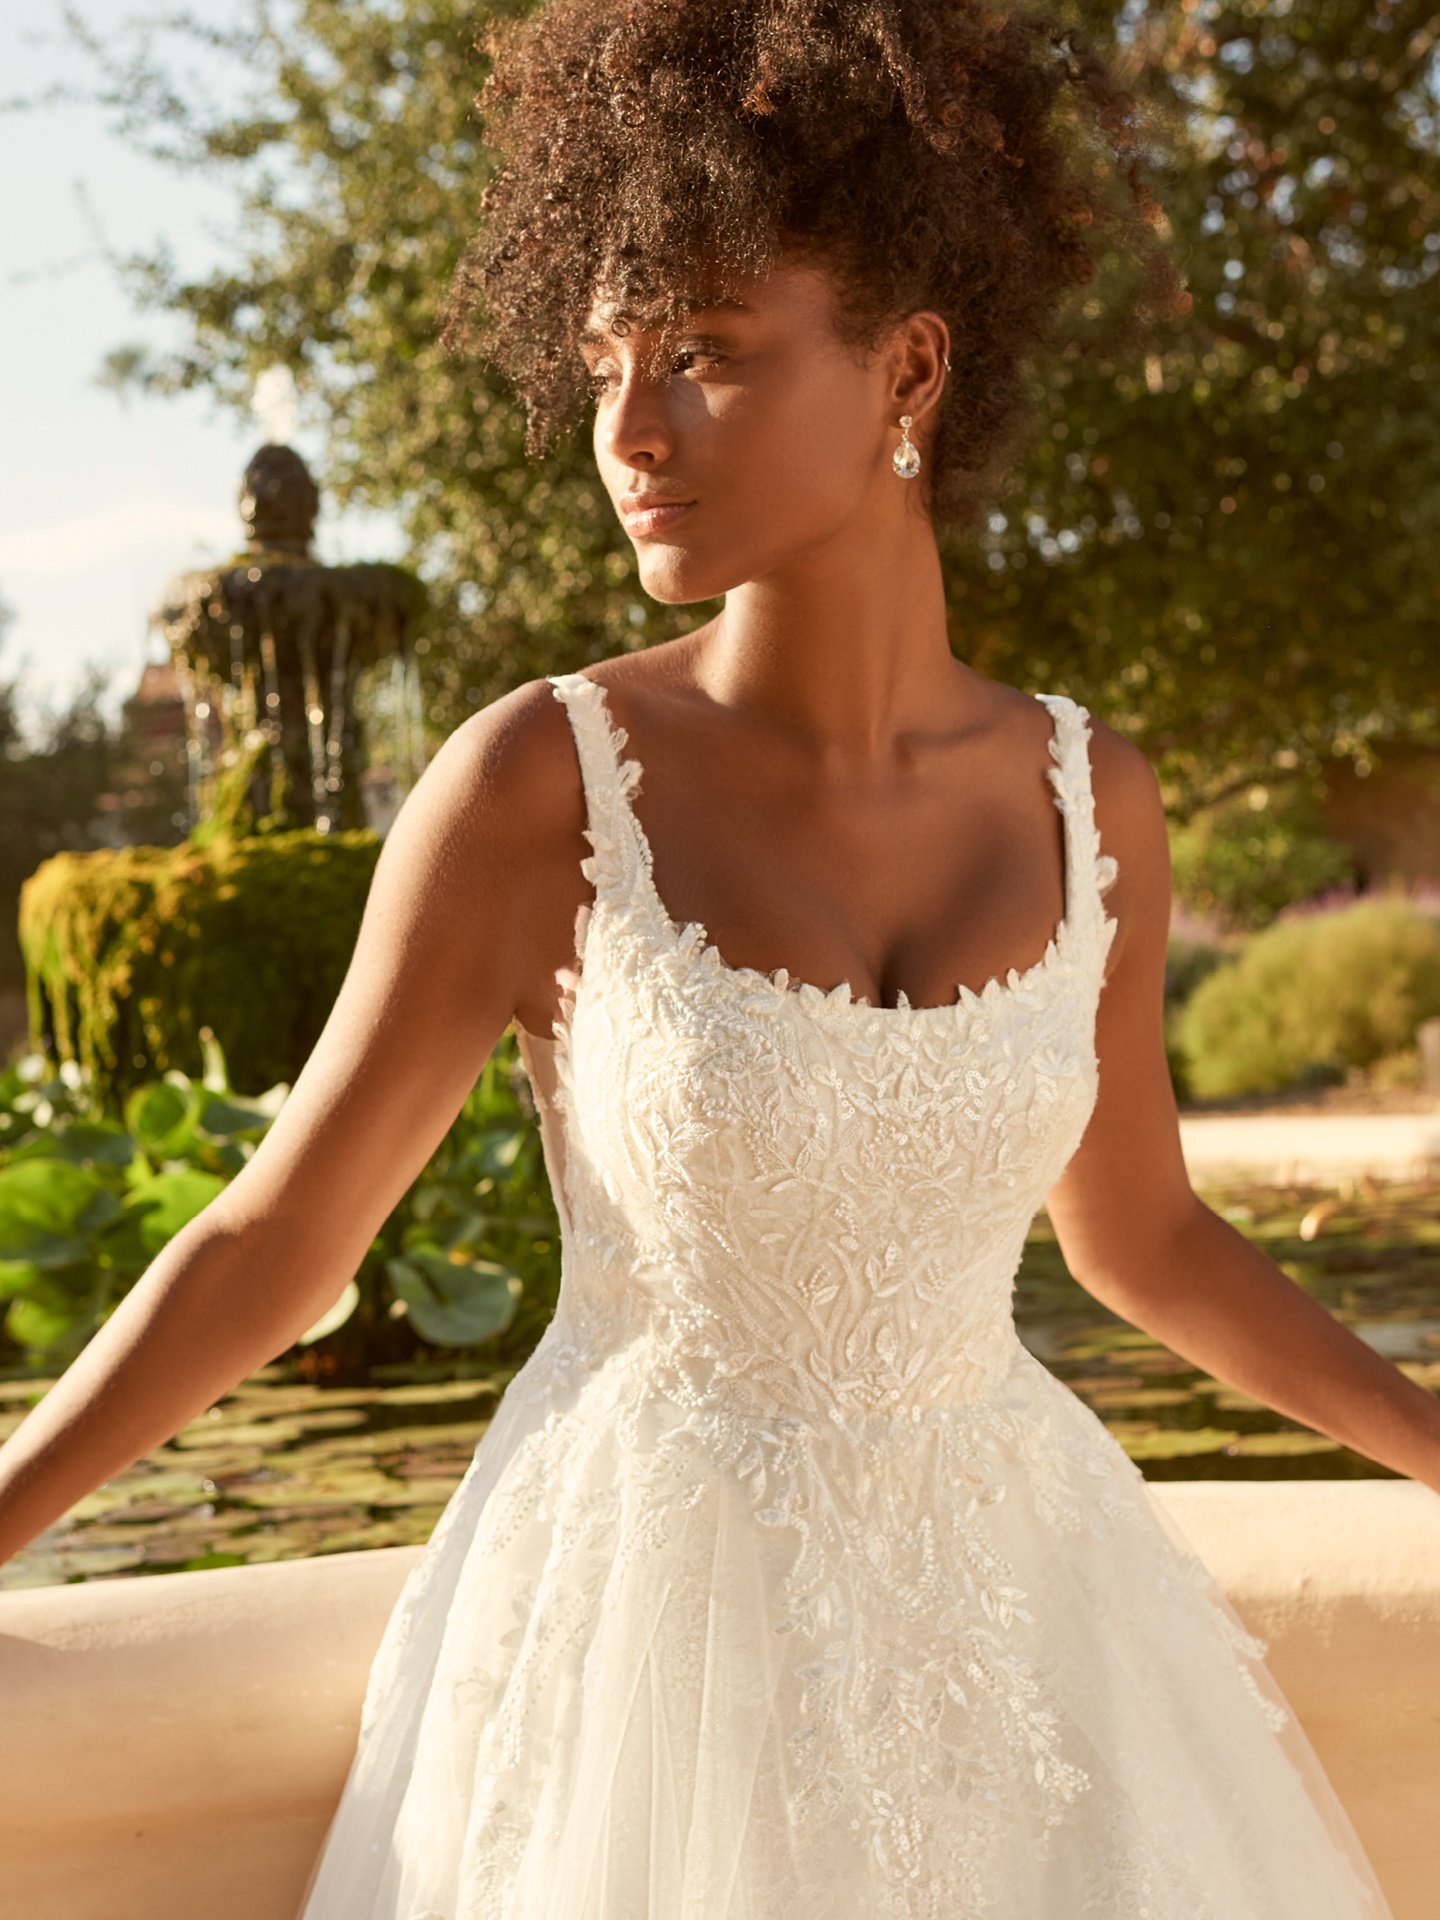 Top 10 Wedding Dress Styles and Trends for 2022